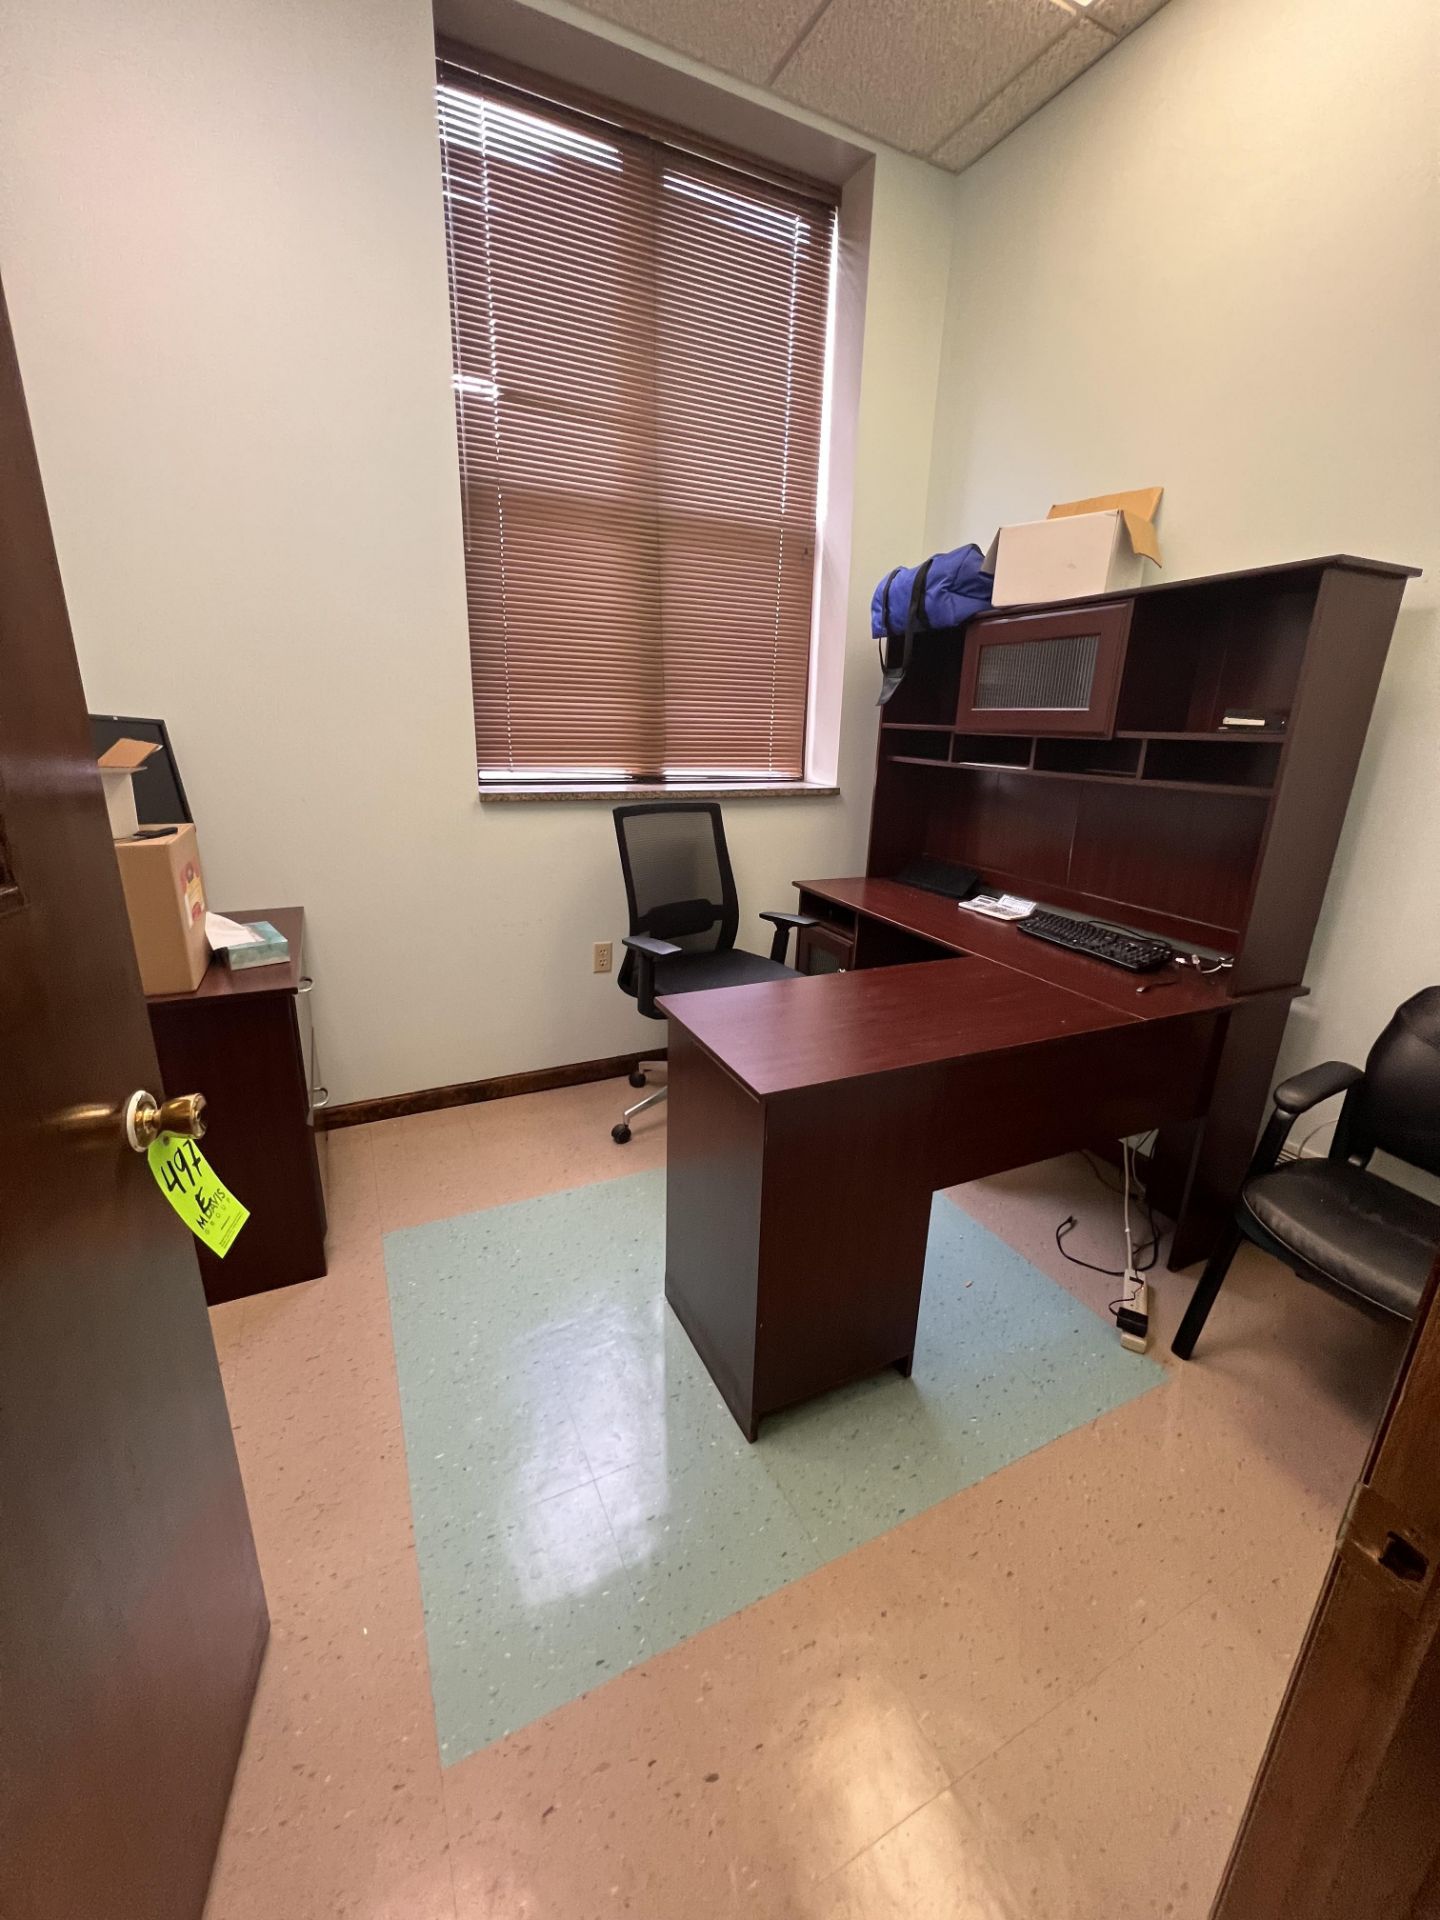 CONTENTS OF OFFICE, INCLUDES DESK, CABINETS, CHAIRS, ETC, DOES NOT INCLUDE PHONE OR COMPUTER